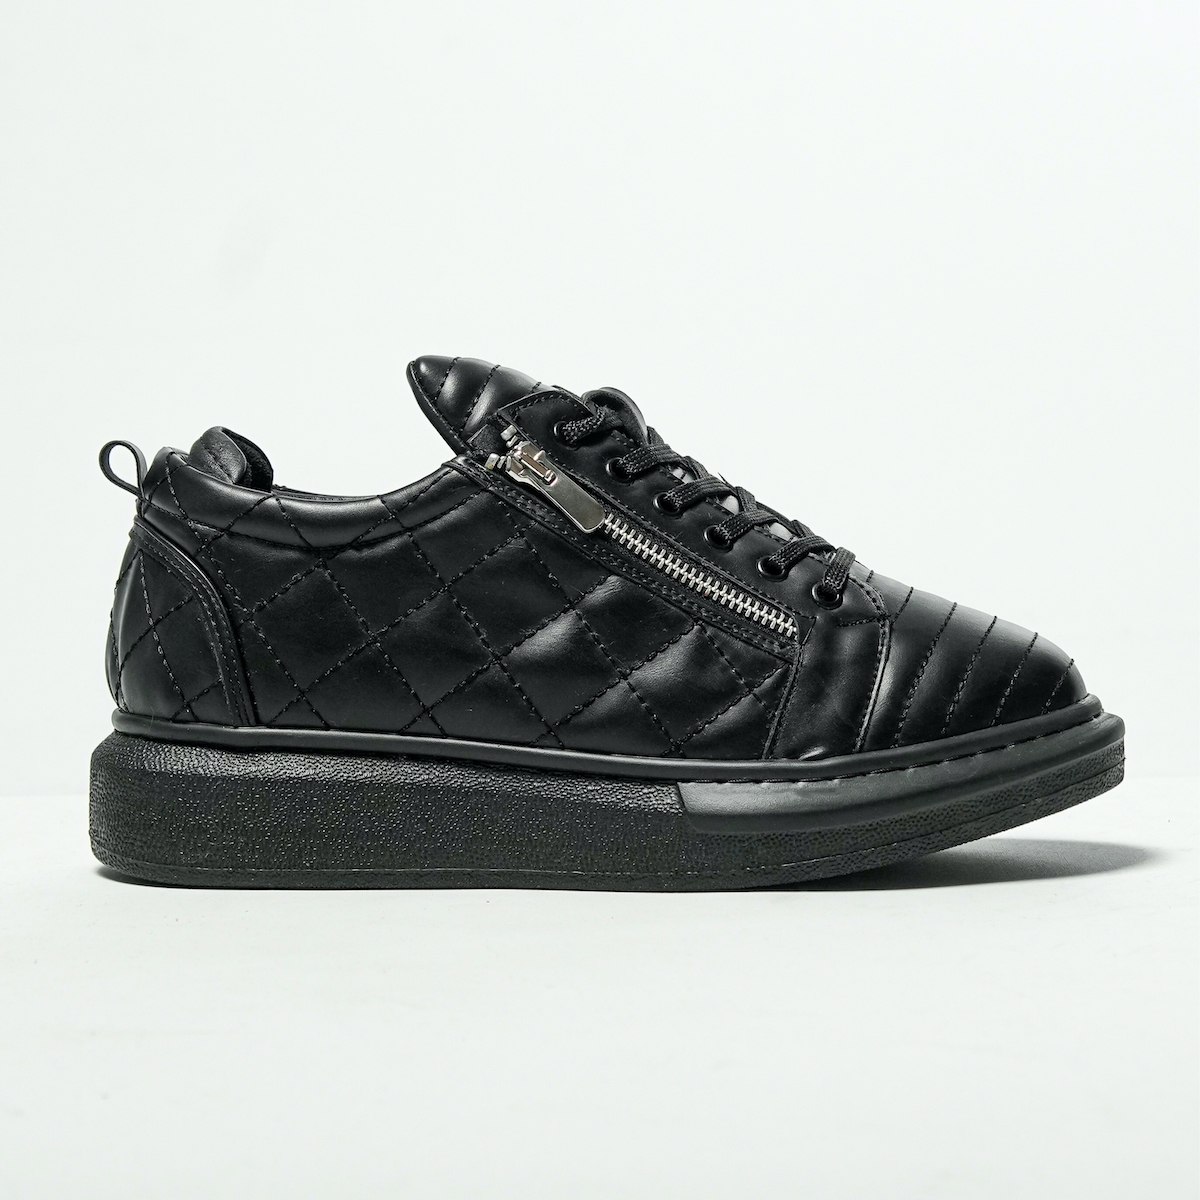 Stitched’n’Zipped Men’s Chunky Sneakers in Black